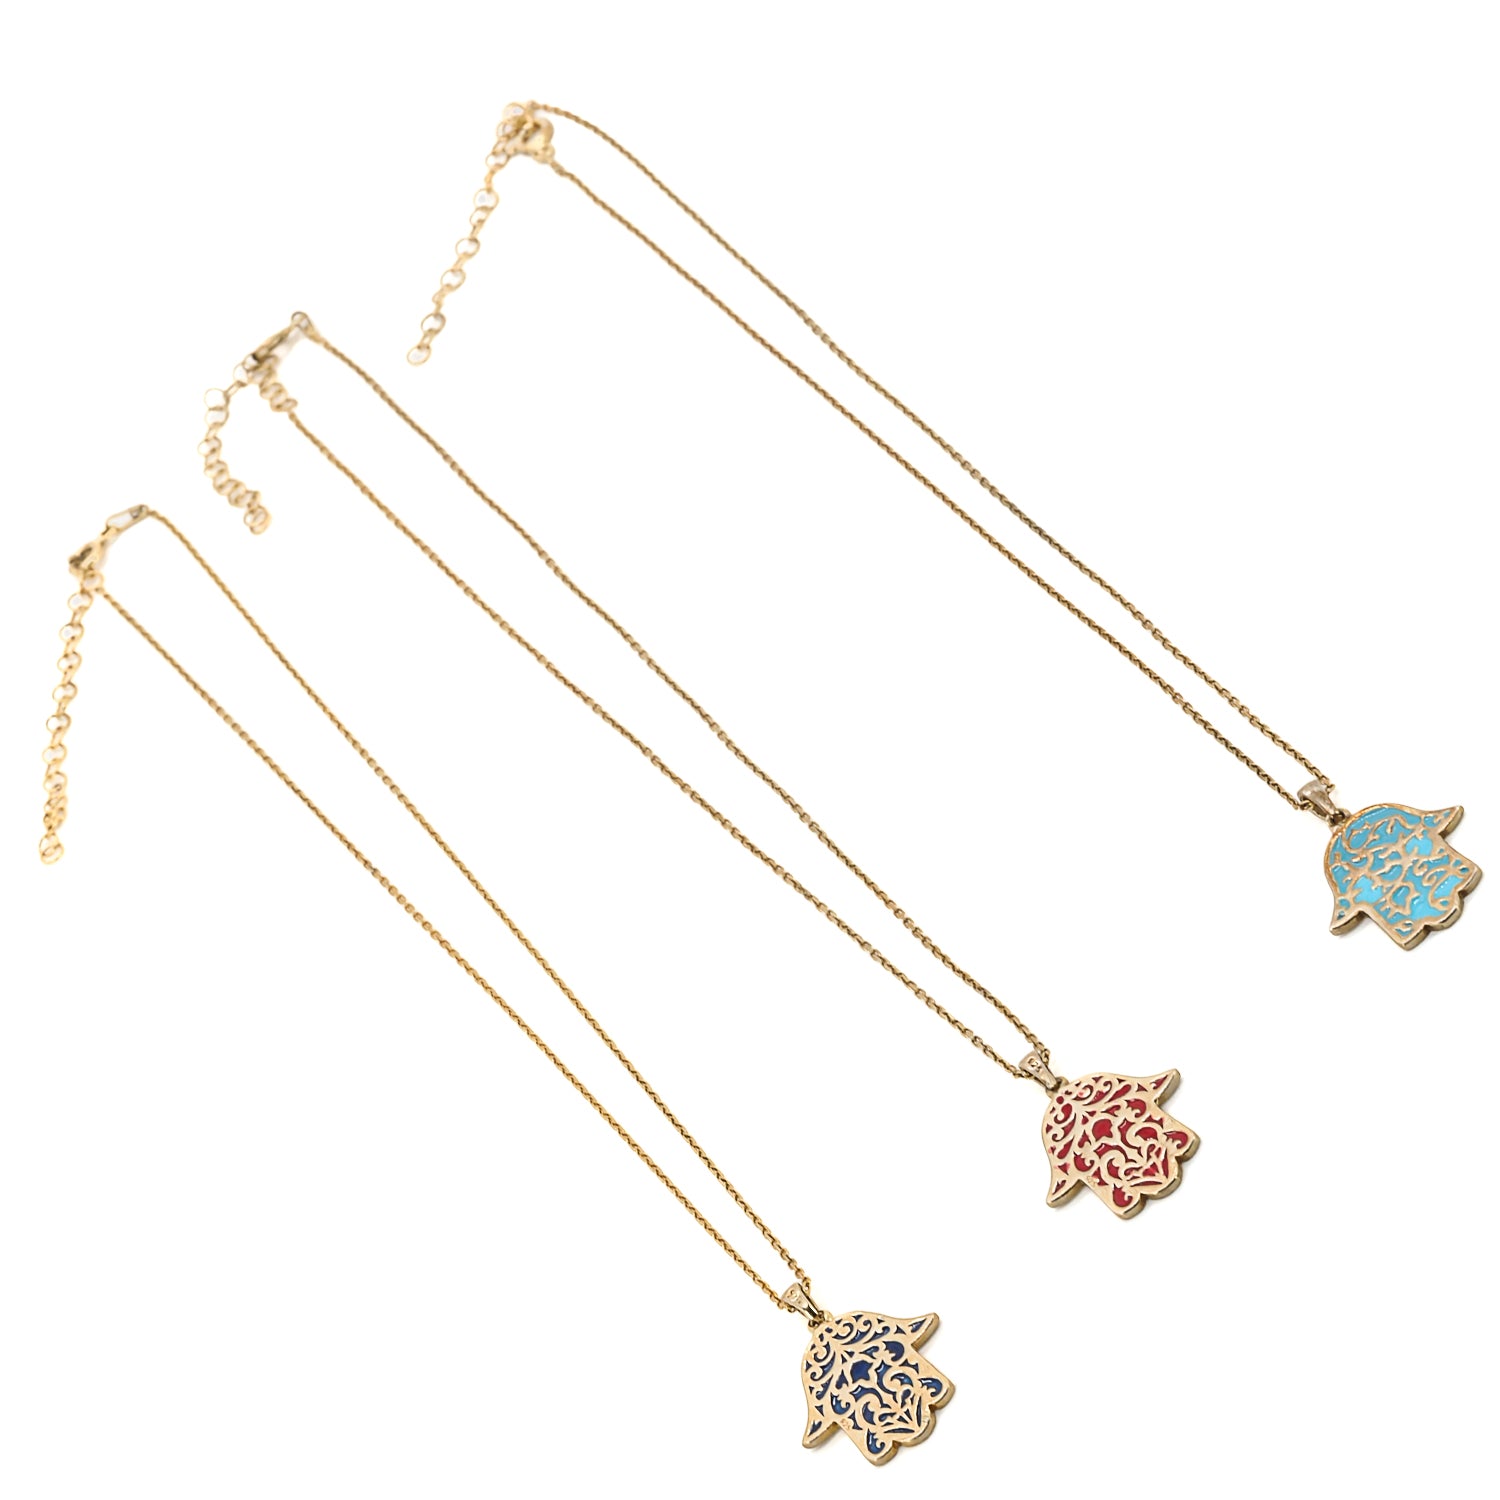 Elevate your style and embrace positivity with the Stay Positive Hamsa Necklace, adorned with a stunning hamsa pendant made of sterling silver and 18K gold plating with colorful enamel accents.